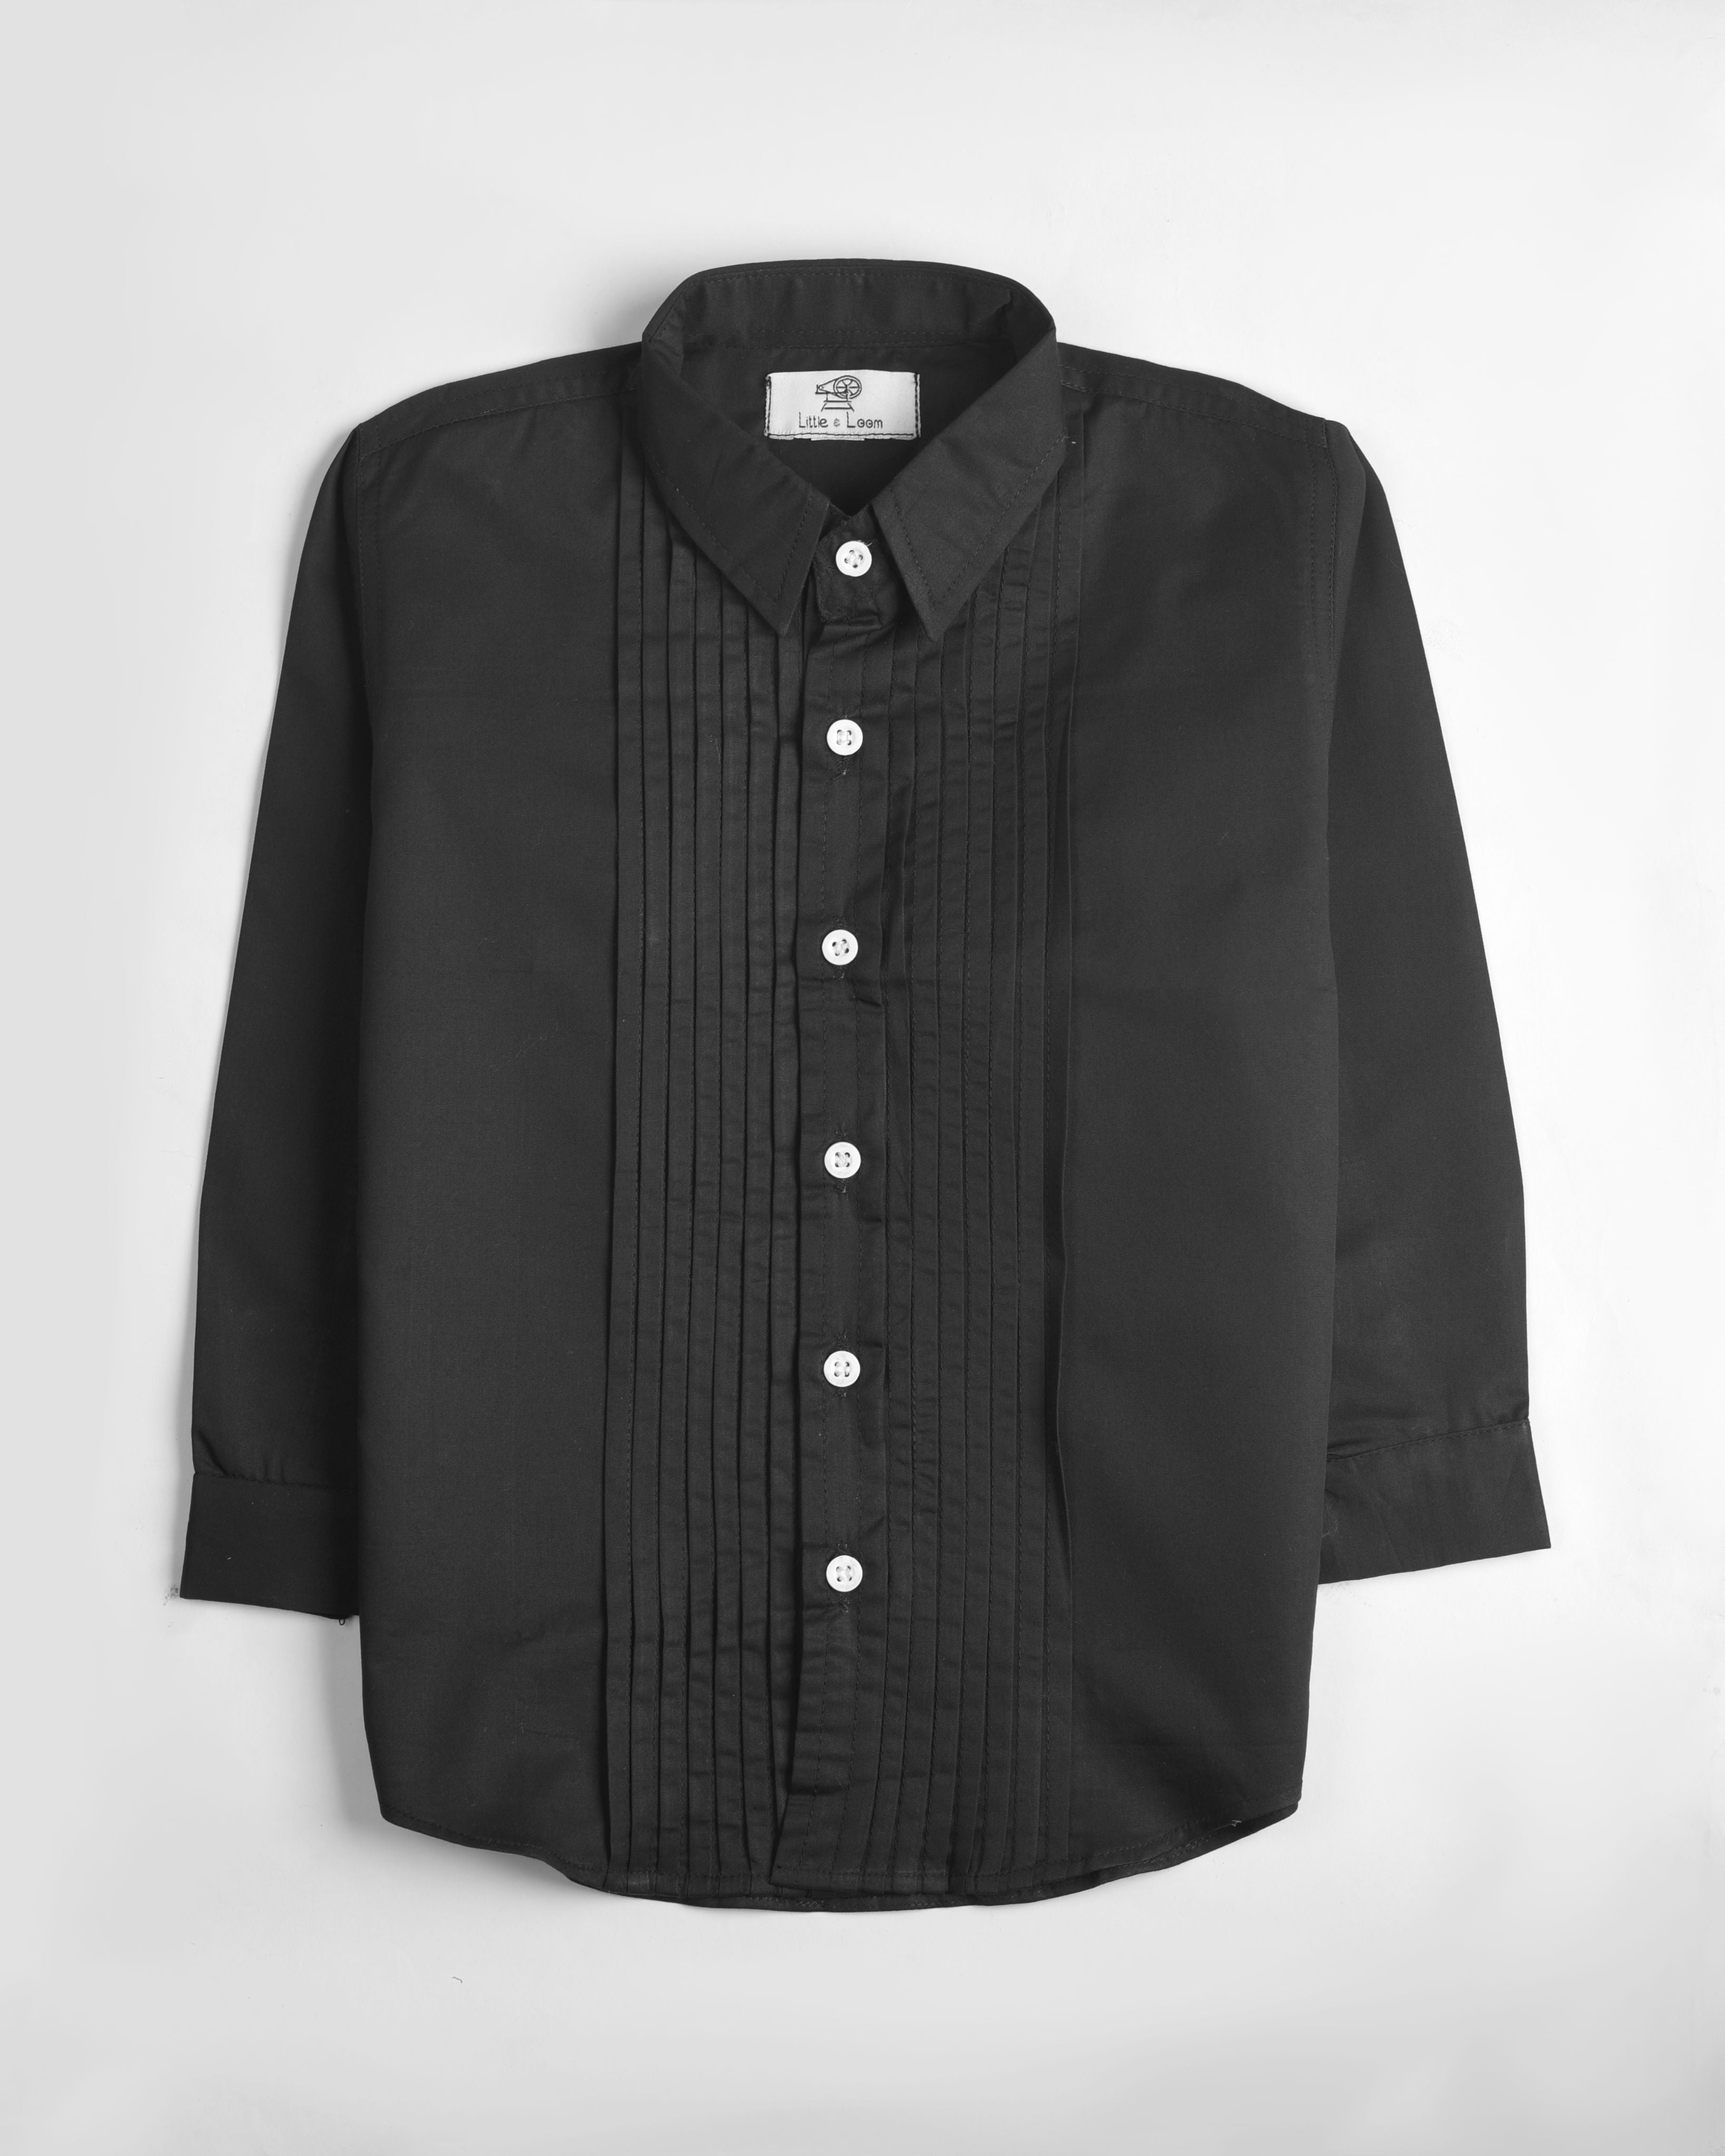 BLACK PLEATED SHIRT WITH WHITE BUTTONS